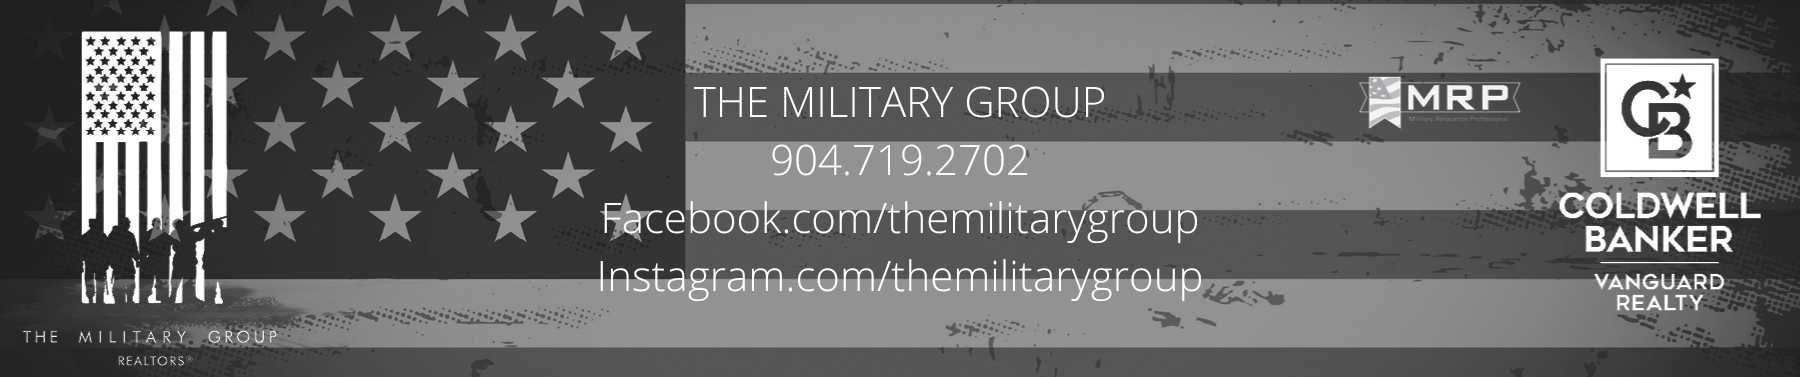 THE MILITARY GROUP 904.720.6675 Facebook.comthemilitarygroup Instagram.comthemilitarygroup (1)